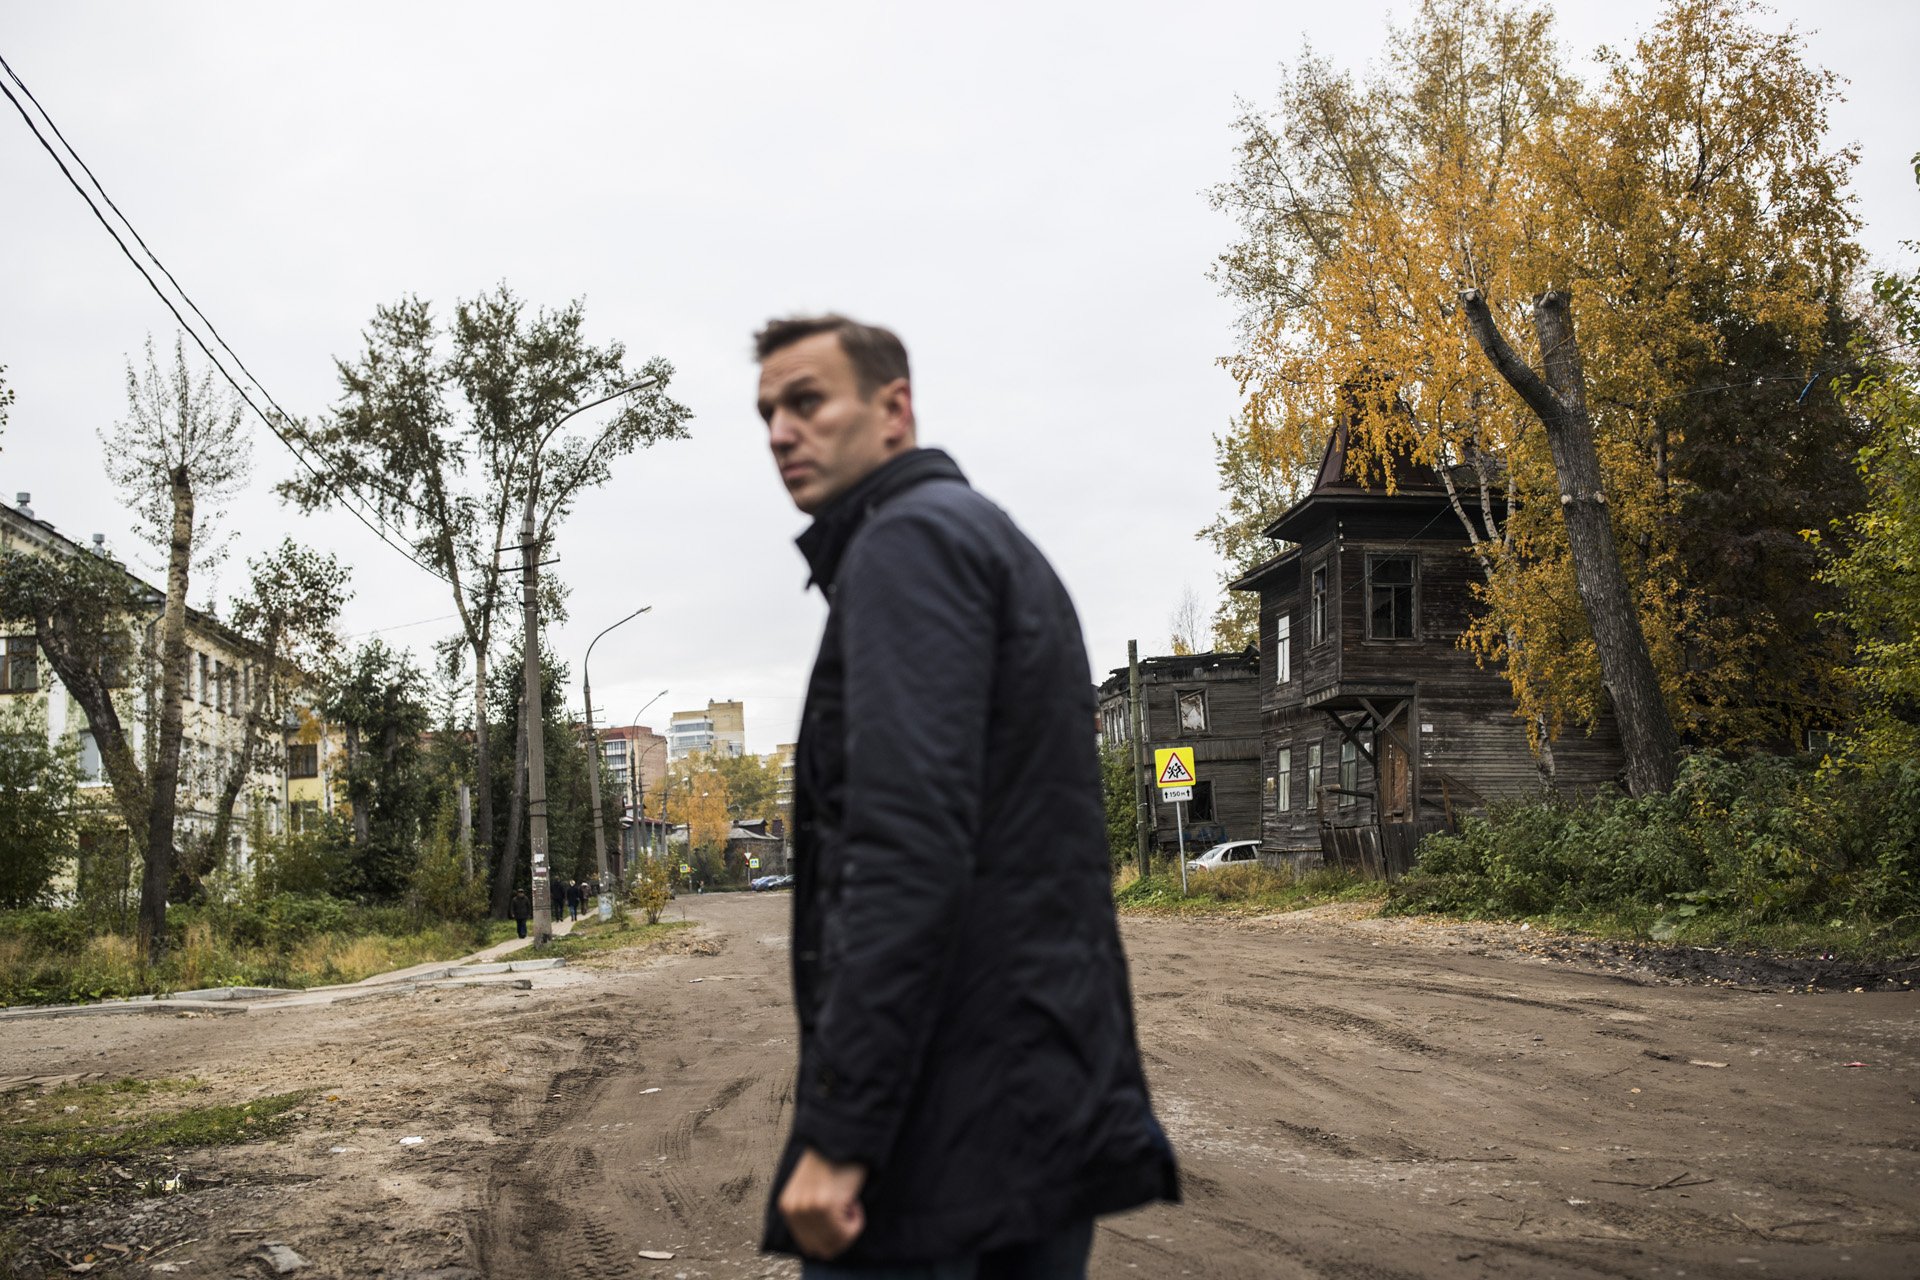  Alexey Navalny looks at crumbling houses in Arkhangelsk, Russia, a city some 1000 kilometers from Moscow to the north, on October 1, 2017. Campaign trips let Navalny see the poverty many Russians live in.This is a news photo, shot without any influe